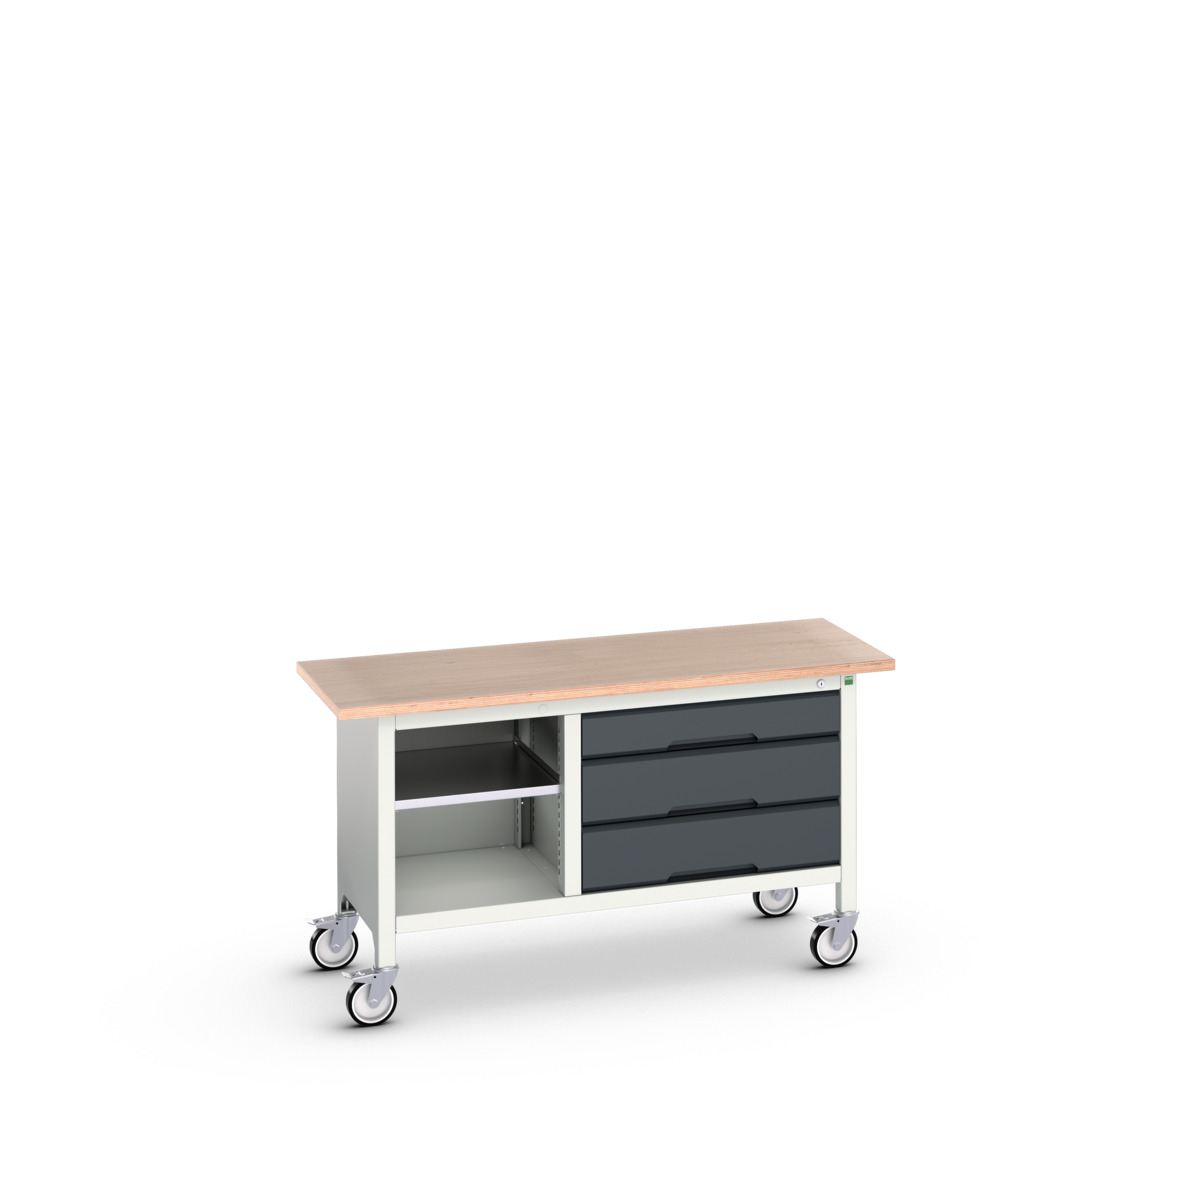 16923213.19 - verso mobile storage bench (mpx)